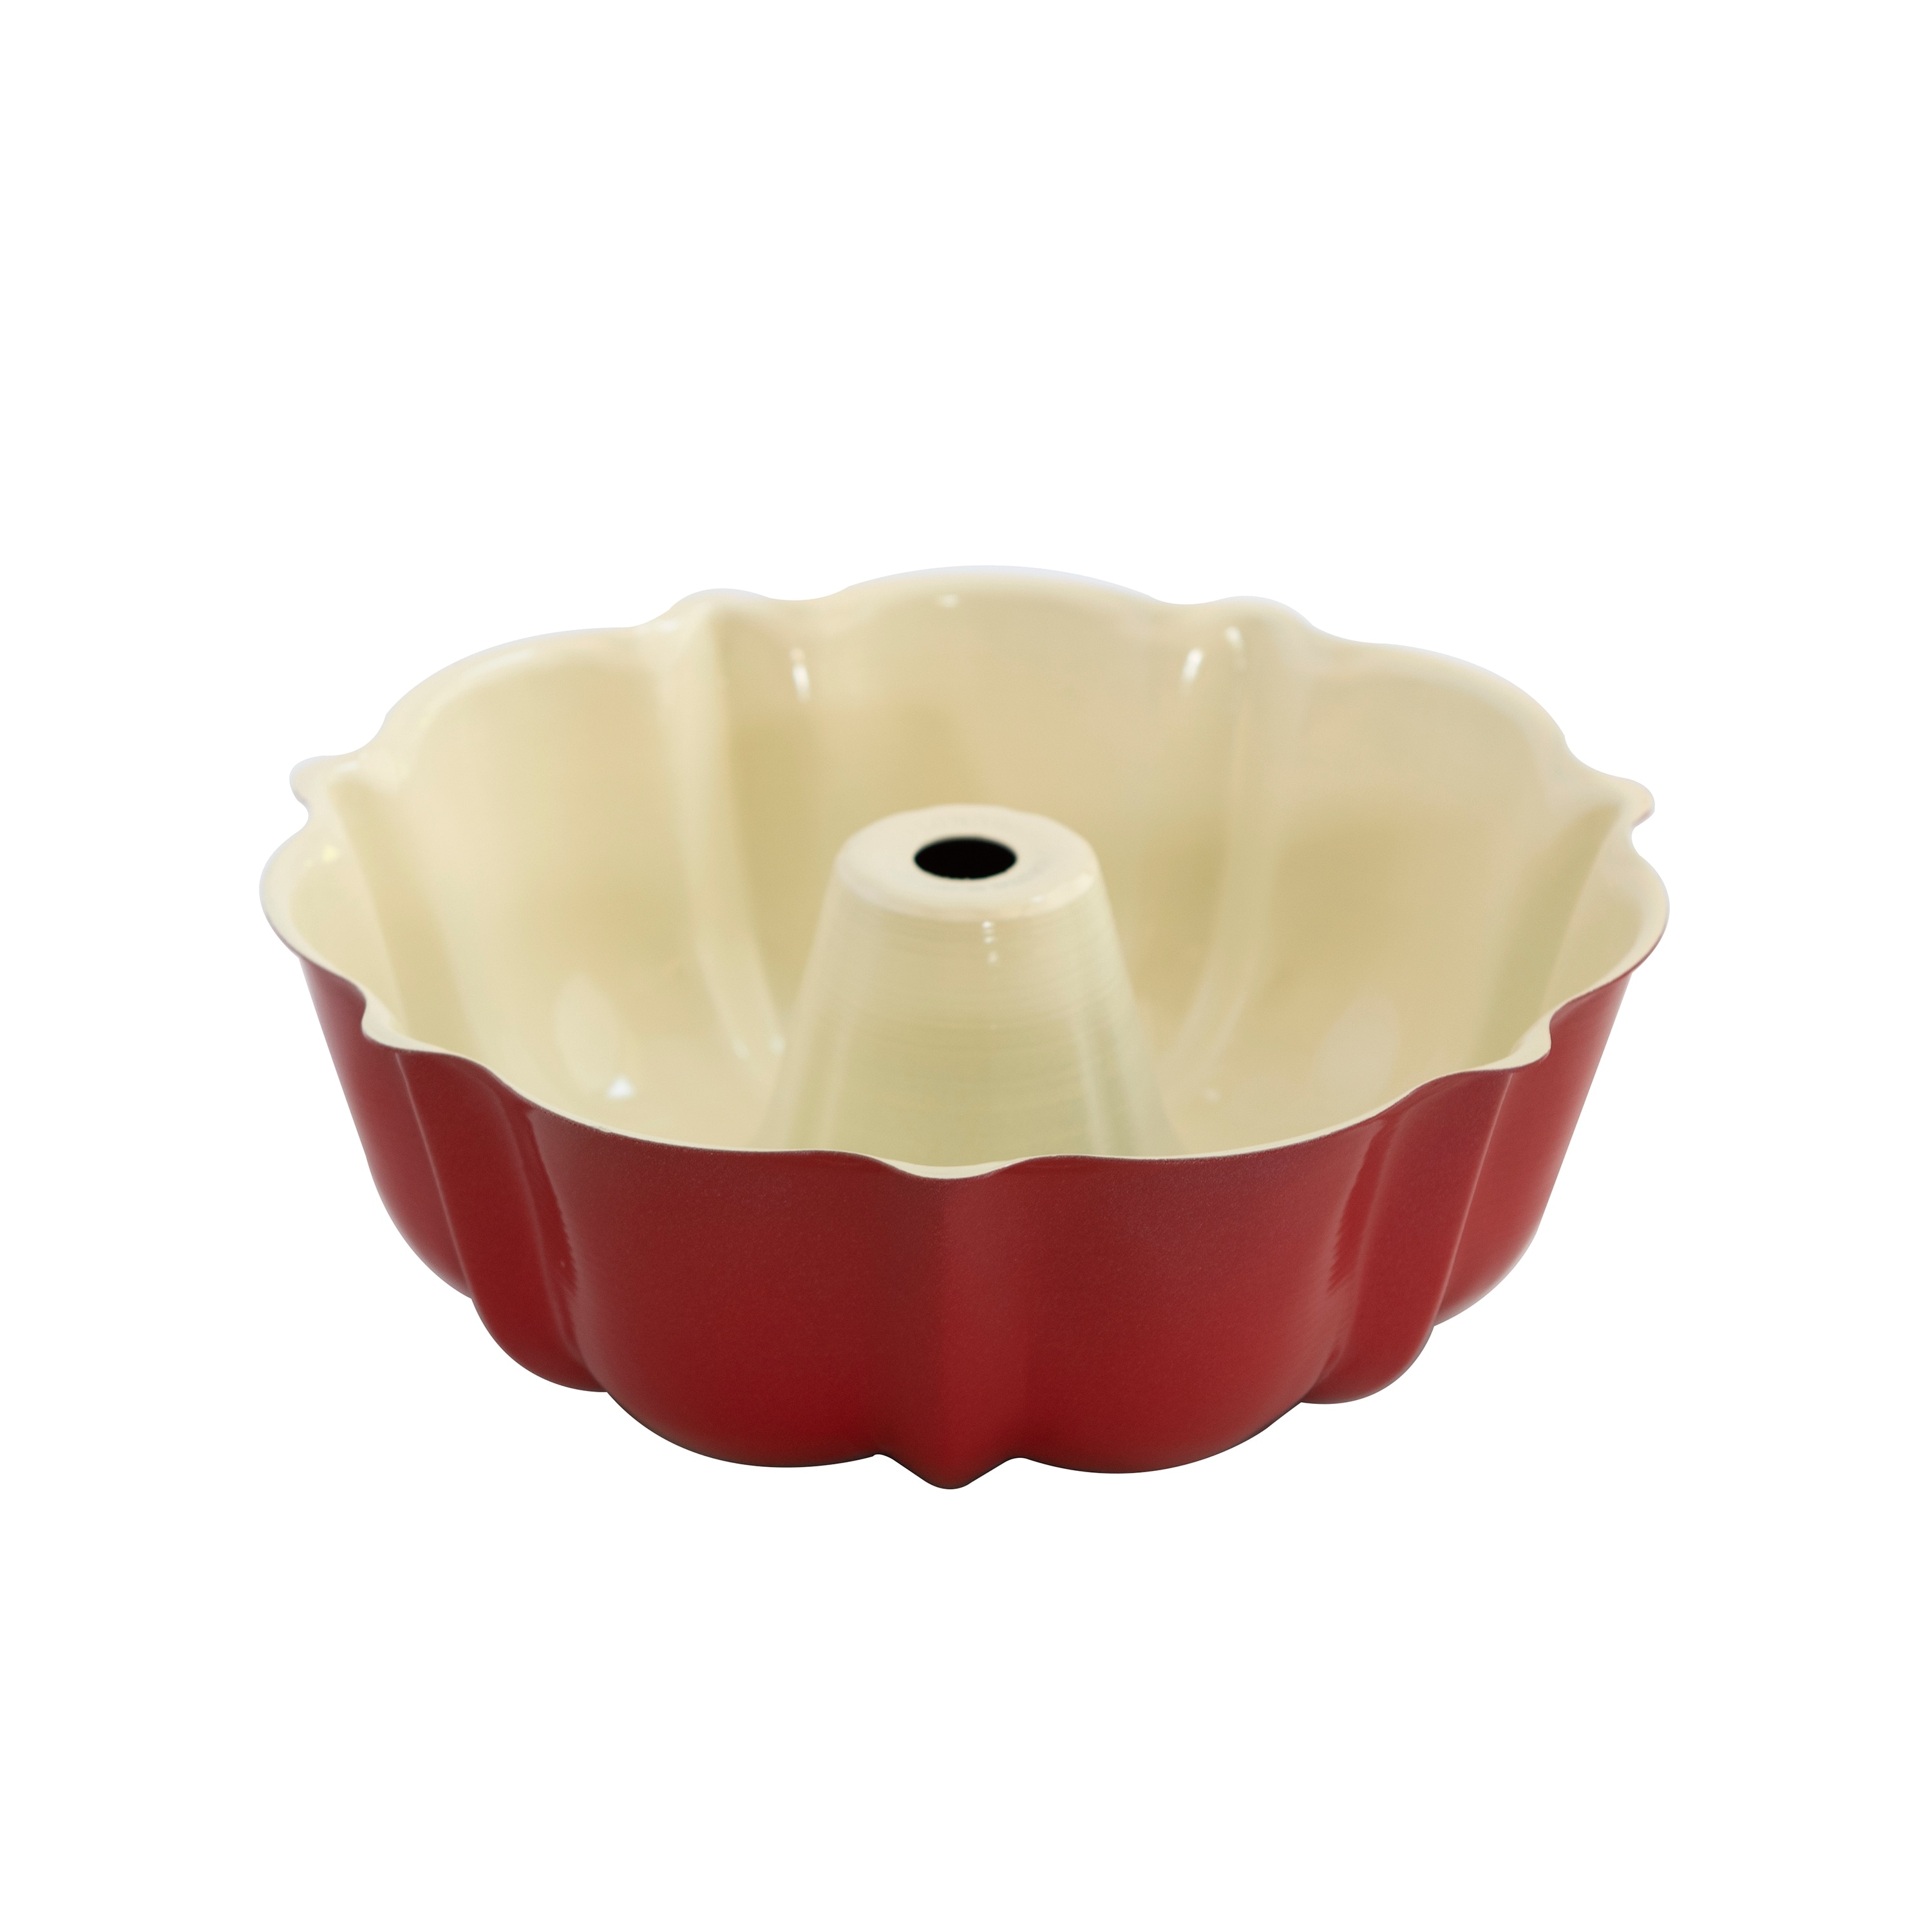 https://ak1.ostkcdn.com/images/products/is/images/direct/1806d7b3abcbc8a6816213e1188b042230aa1015/Nordic-Ware-6-Cup-Bundt-Pan%2C-Red.jpg